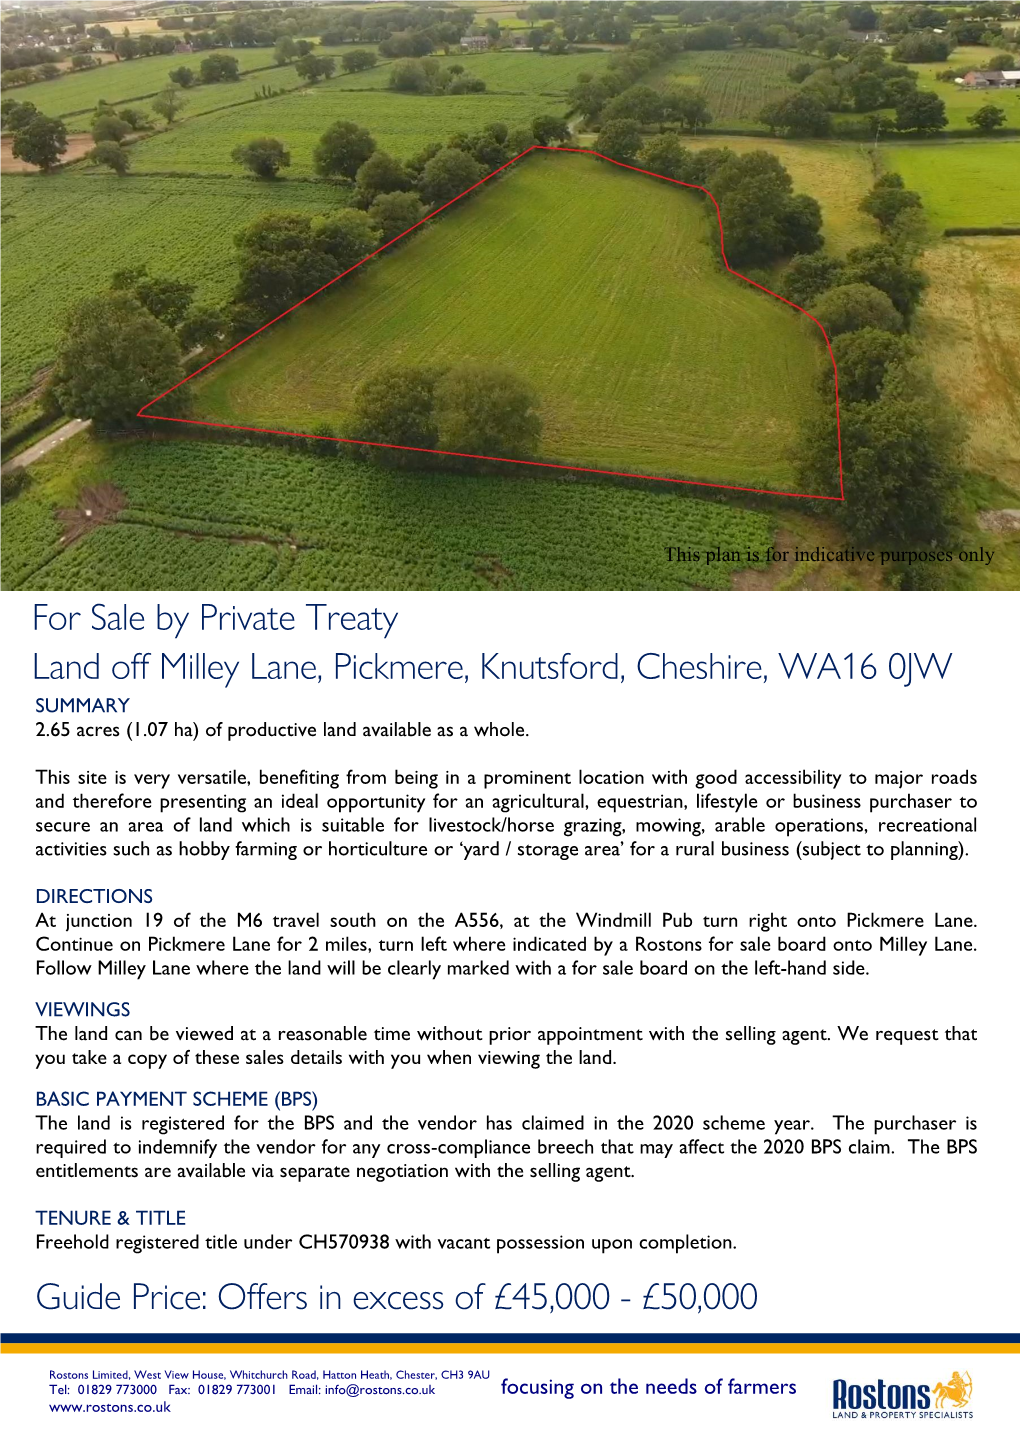 For Sale by Private Treaty Land Off Milley Lane, Pickmere, Knutsford, Cheshire, WA16 0JW Guide Price